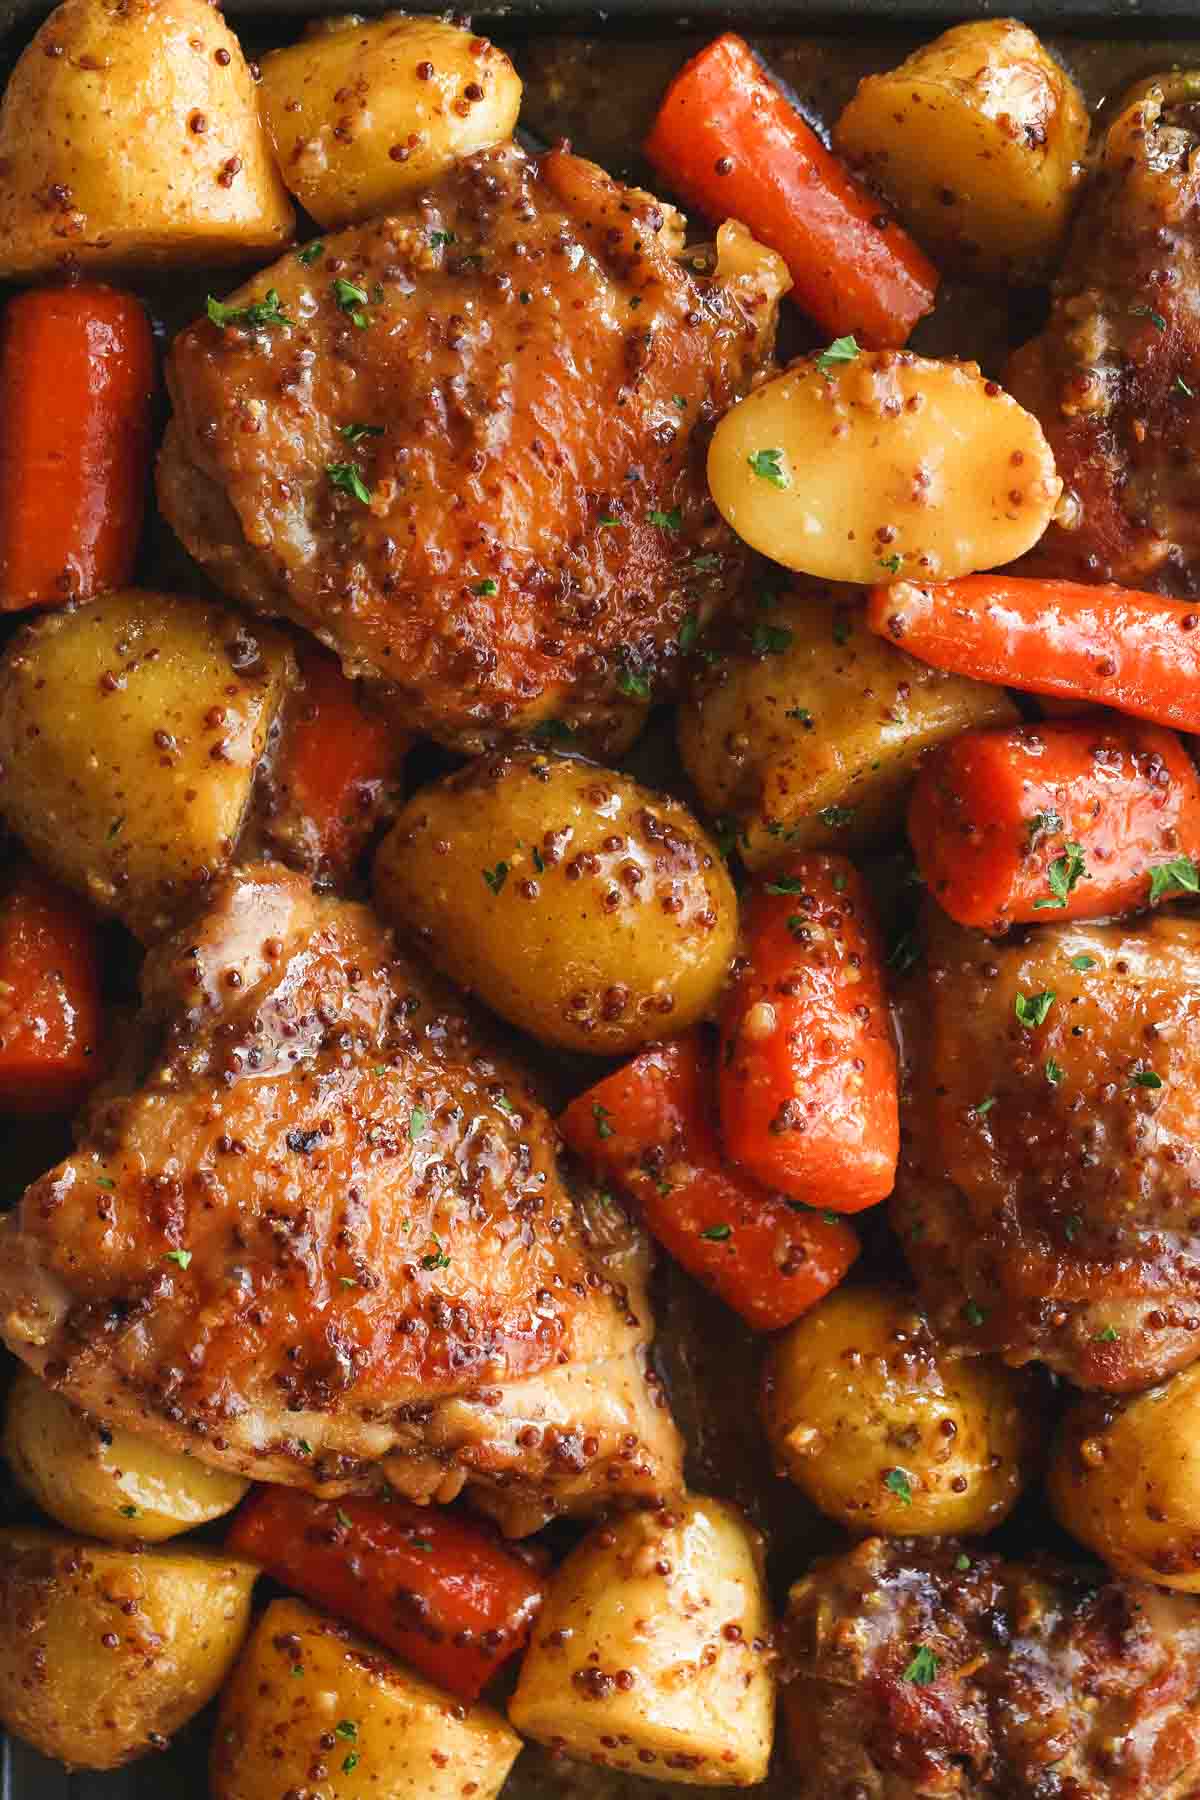 Honey mustard chicken with baby potatoes and carrots, and grainy mustard